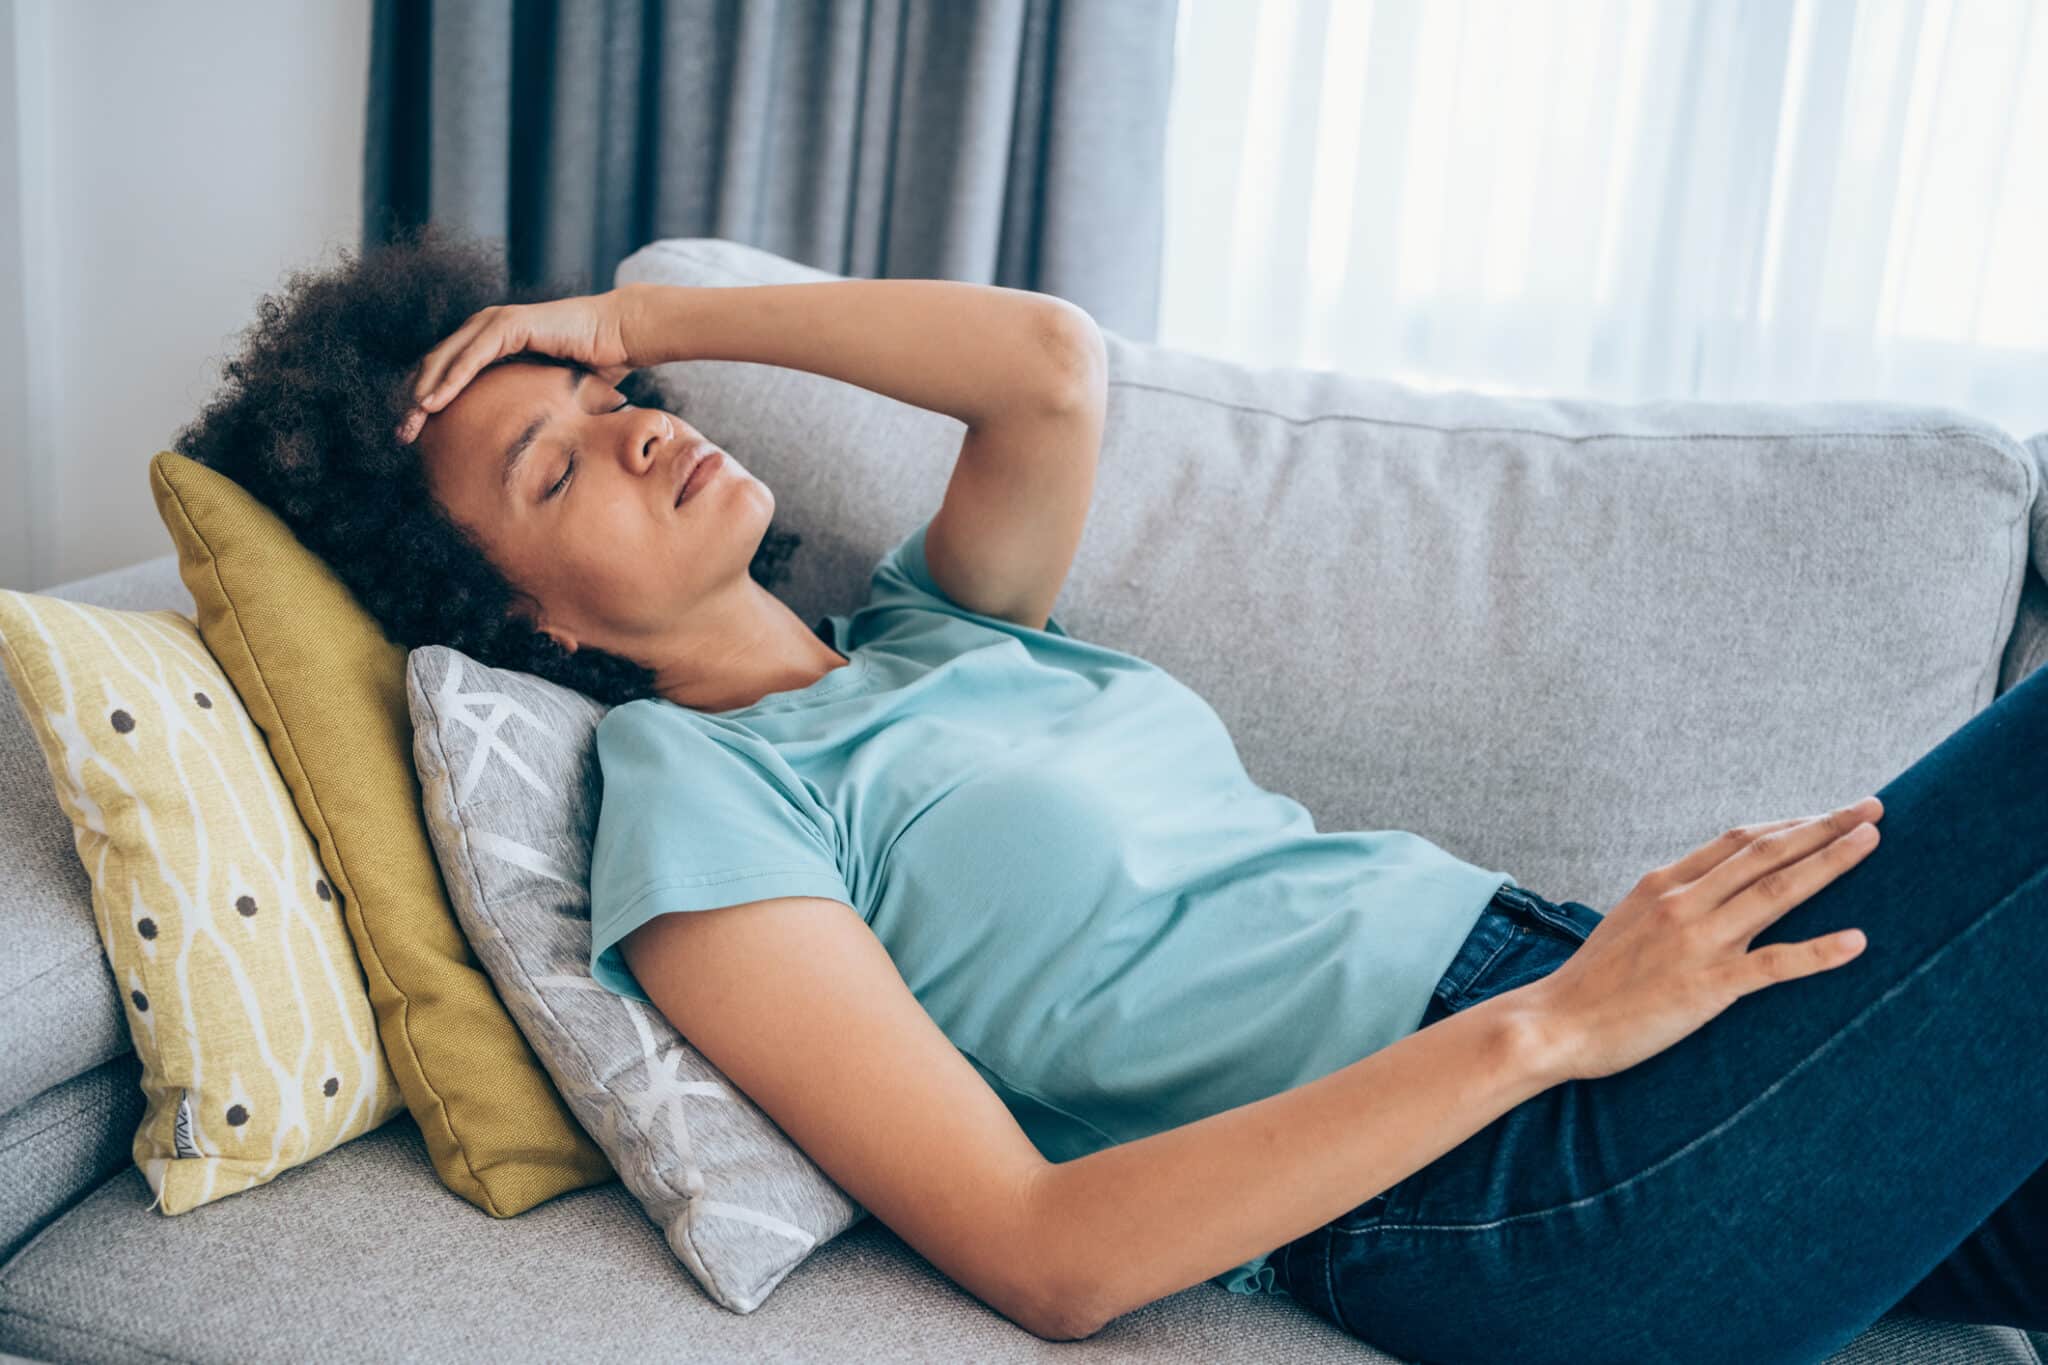 Woman lying on couch experiencing stressful times